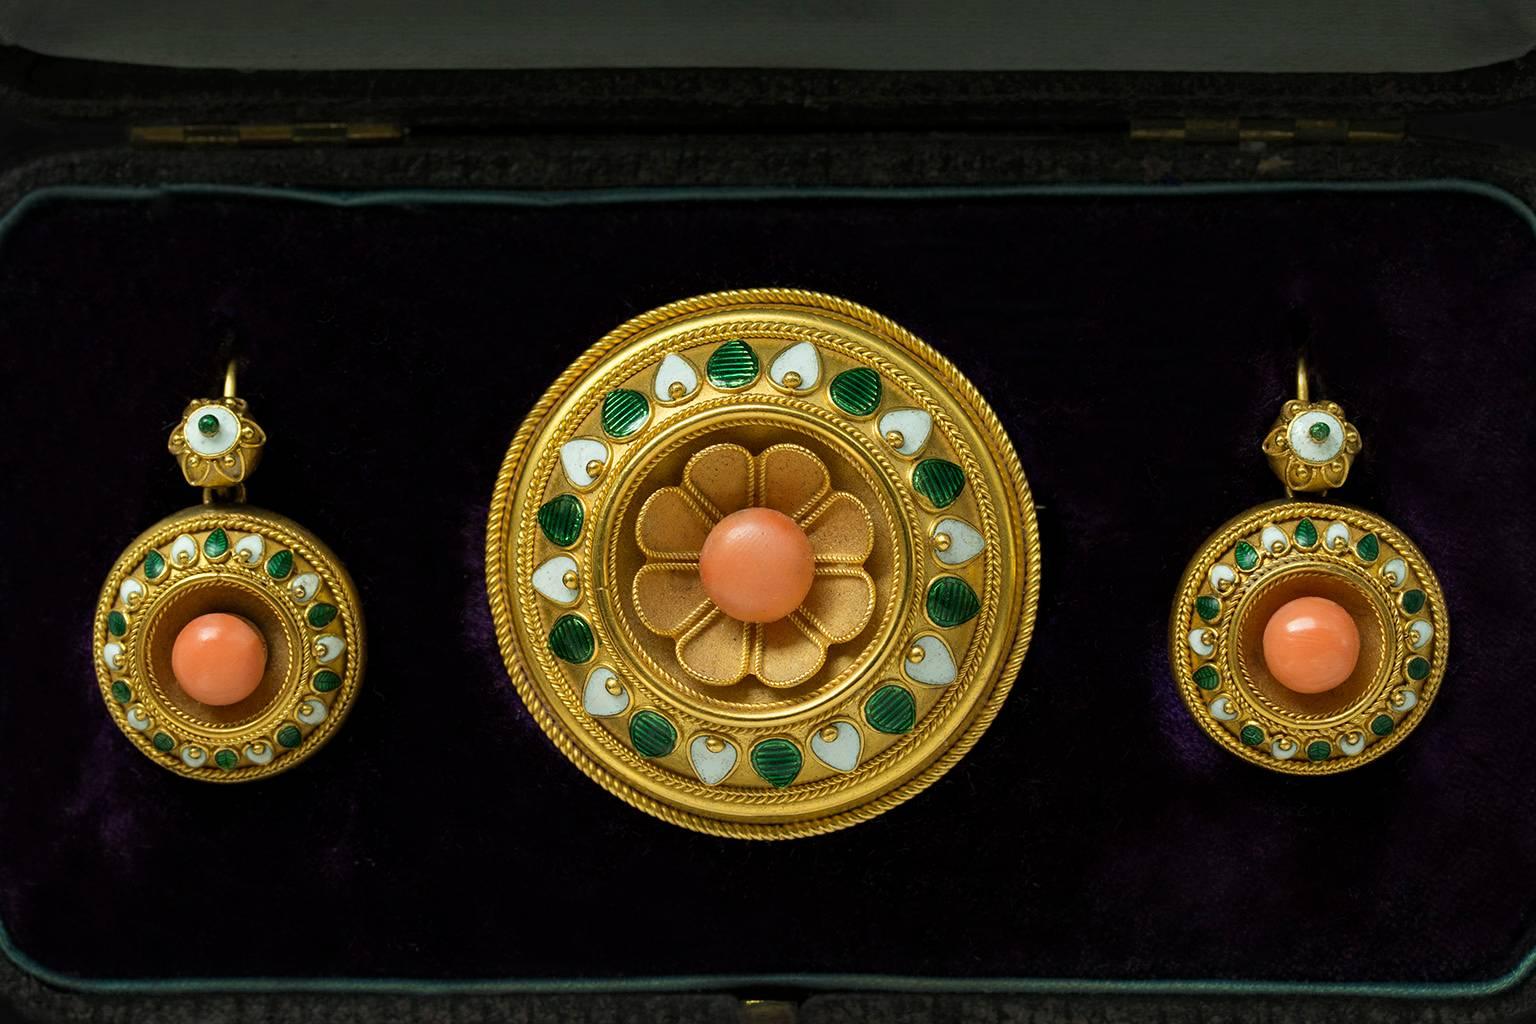 C.1860. A stunning mid-Victorian coral and enamel brooch & earrings set. This high quality set shows beautifully done granulation and rope work details in gold. The rich 18k yellow gold makes a gorgeous harmony with green and white enamel work along